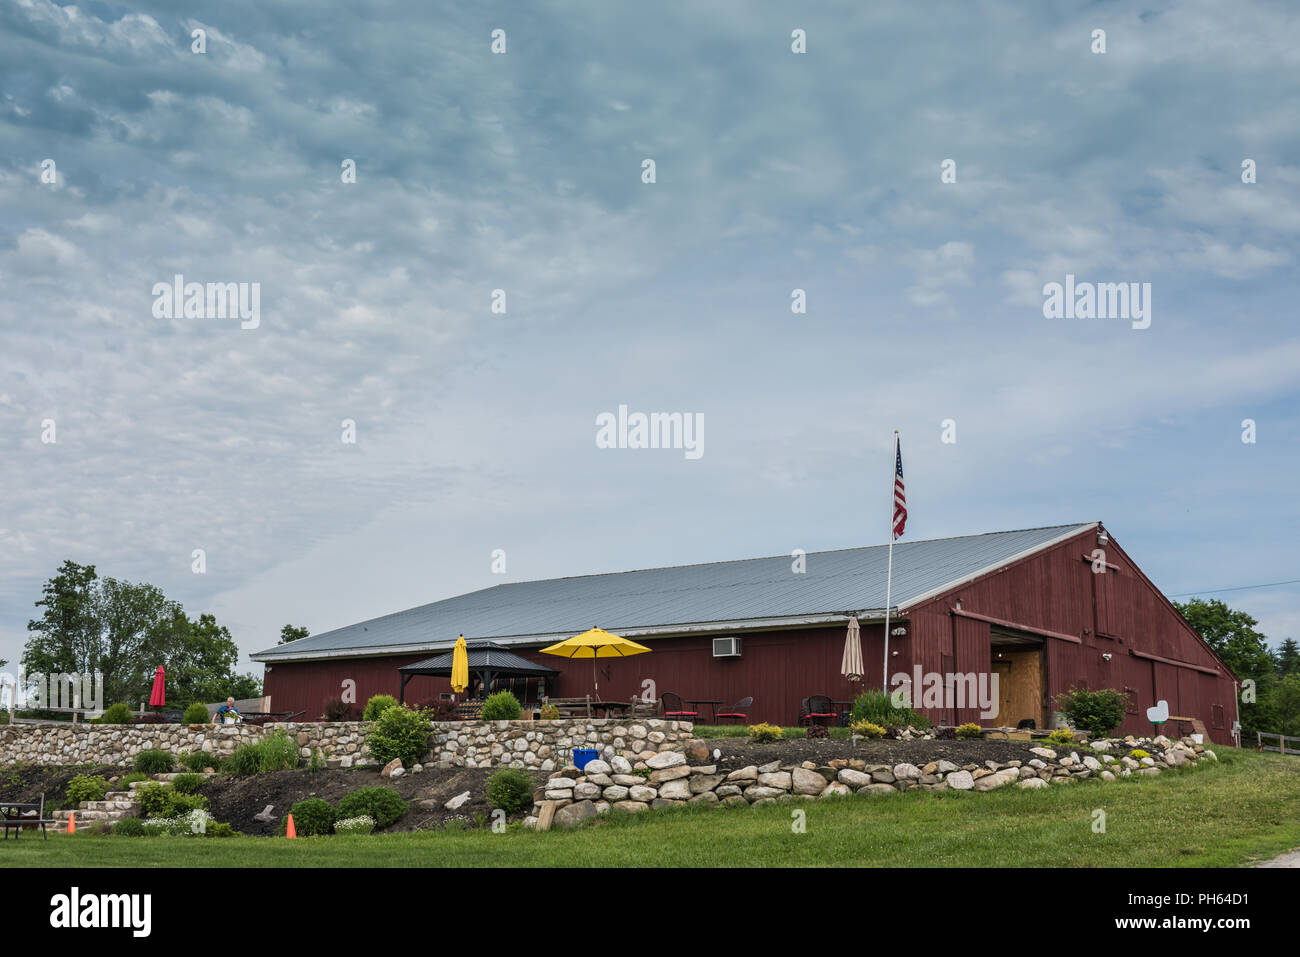 Pine Bush, NY /USA - June 9, 2018: Barn and outdoor seating at Christopher Jacobs Winery. Stock Photo